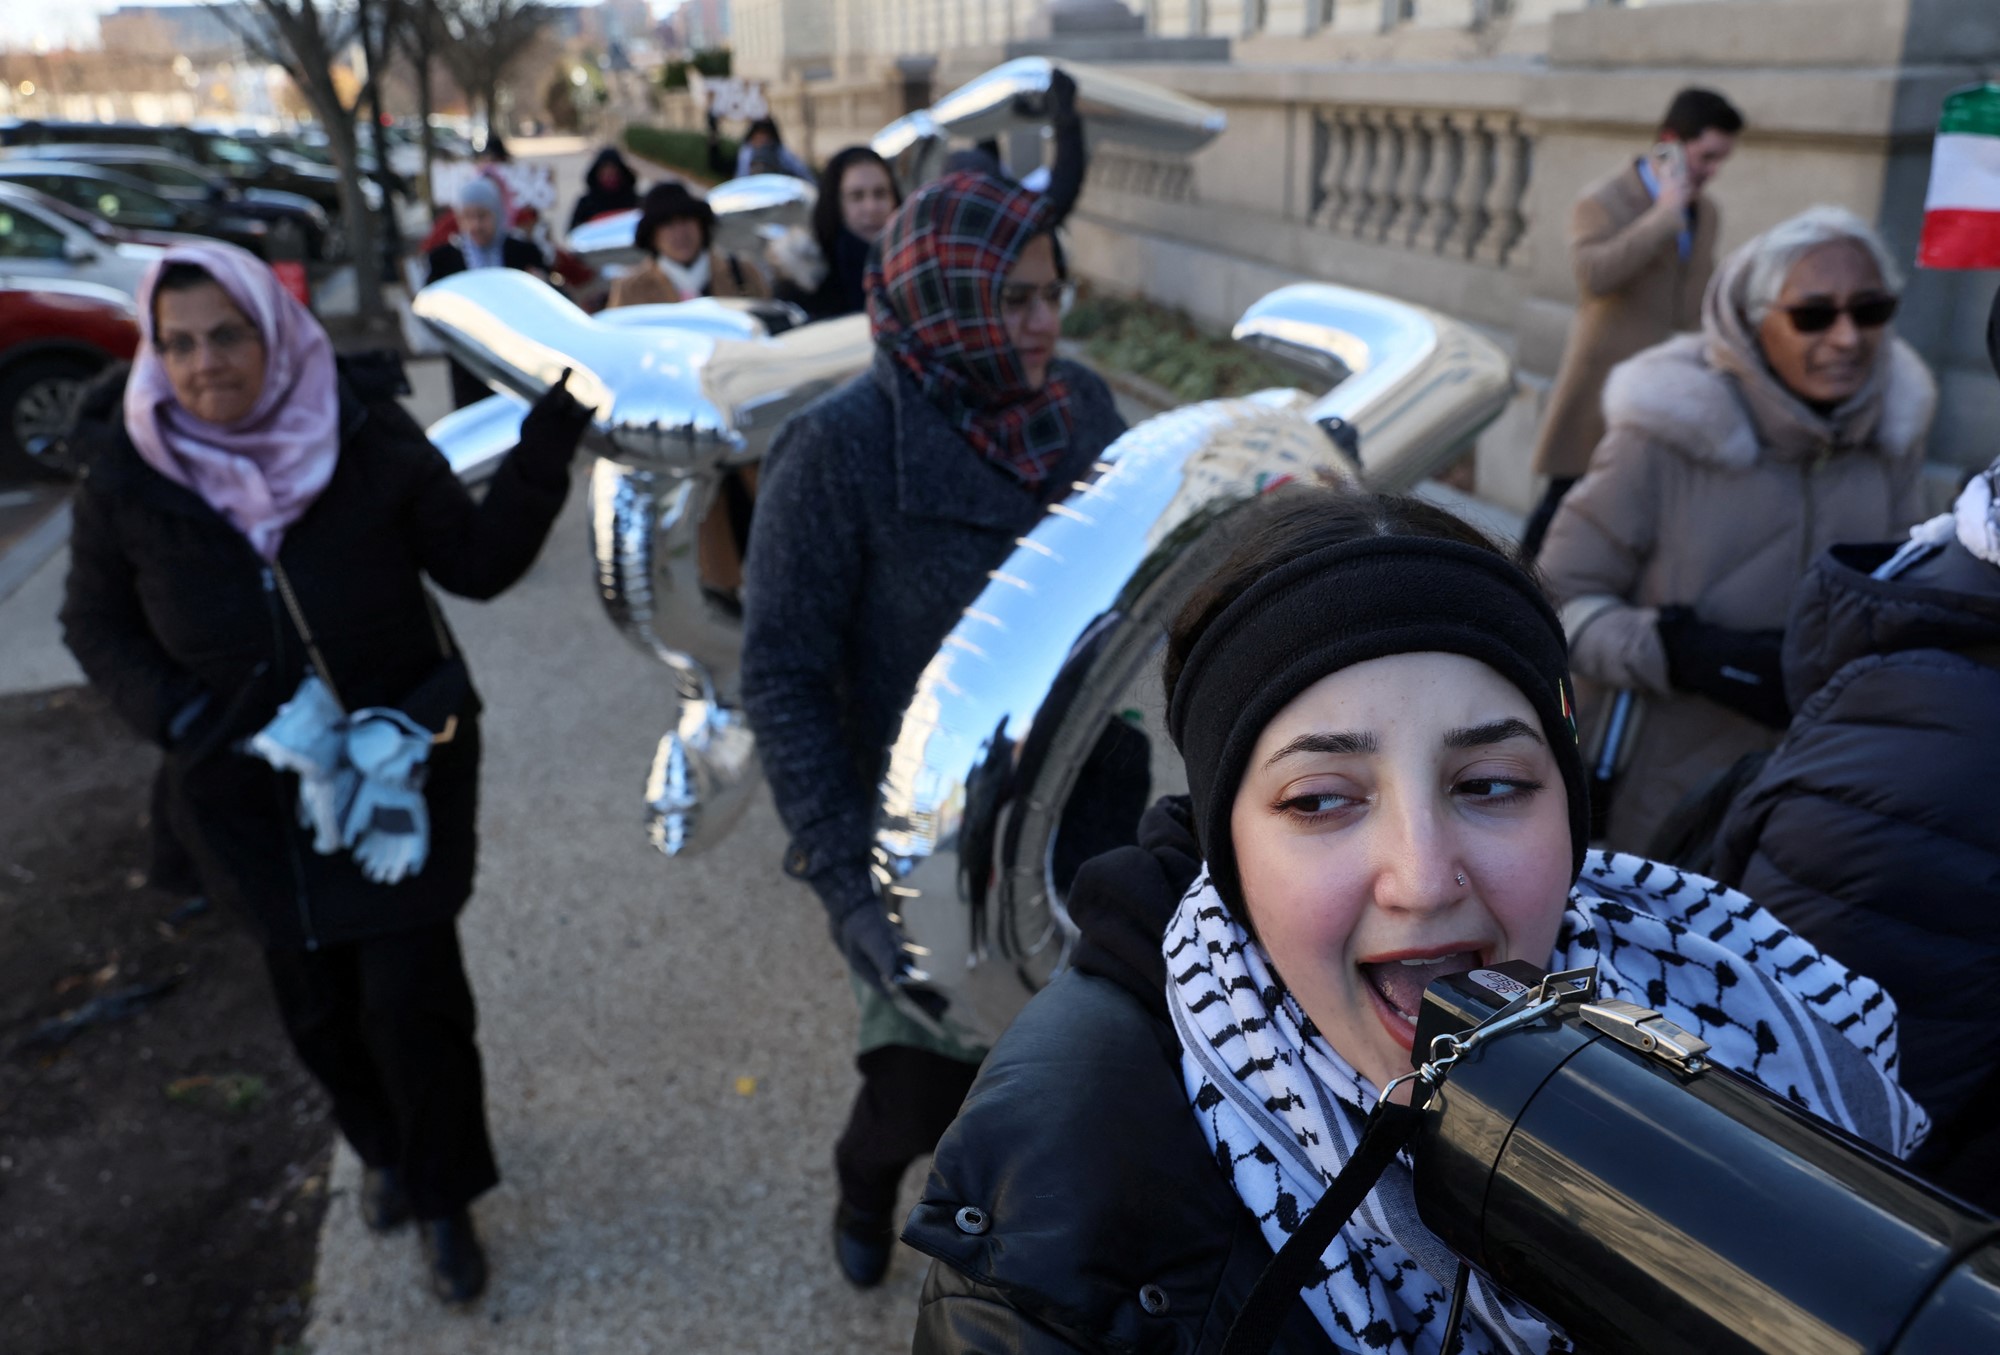 A close up of a group of women, one speaking into a megaphone, walking on a footpath with large inflatable letters and a Palestinian flag